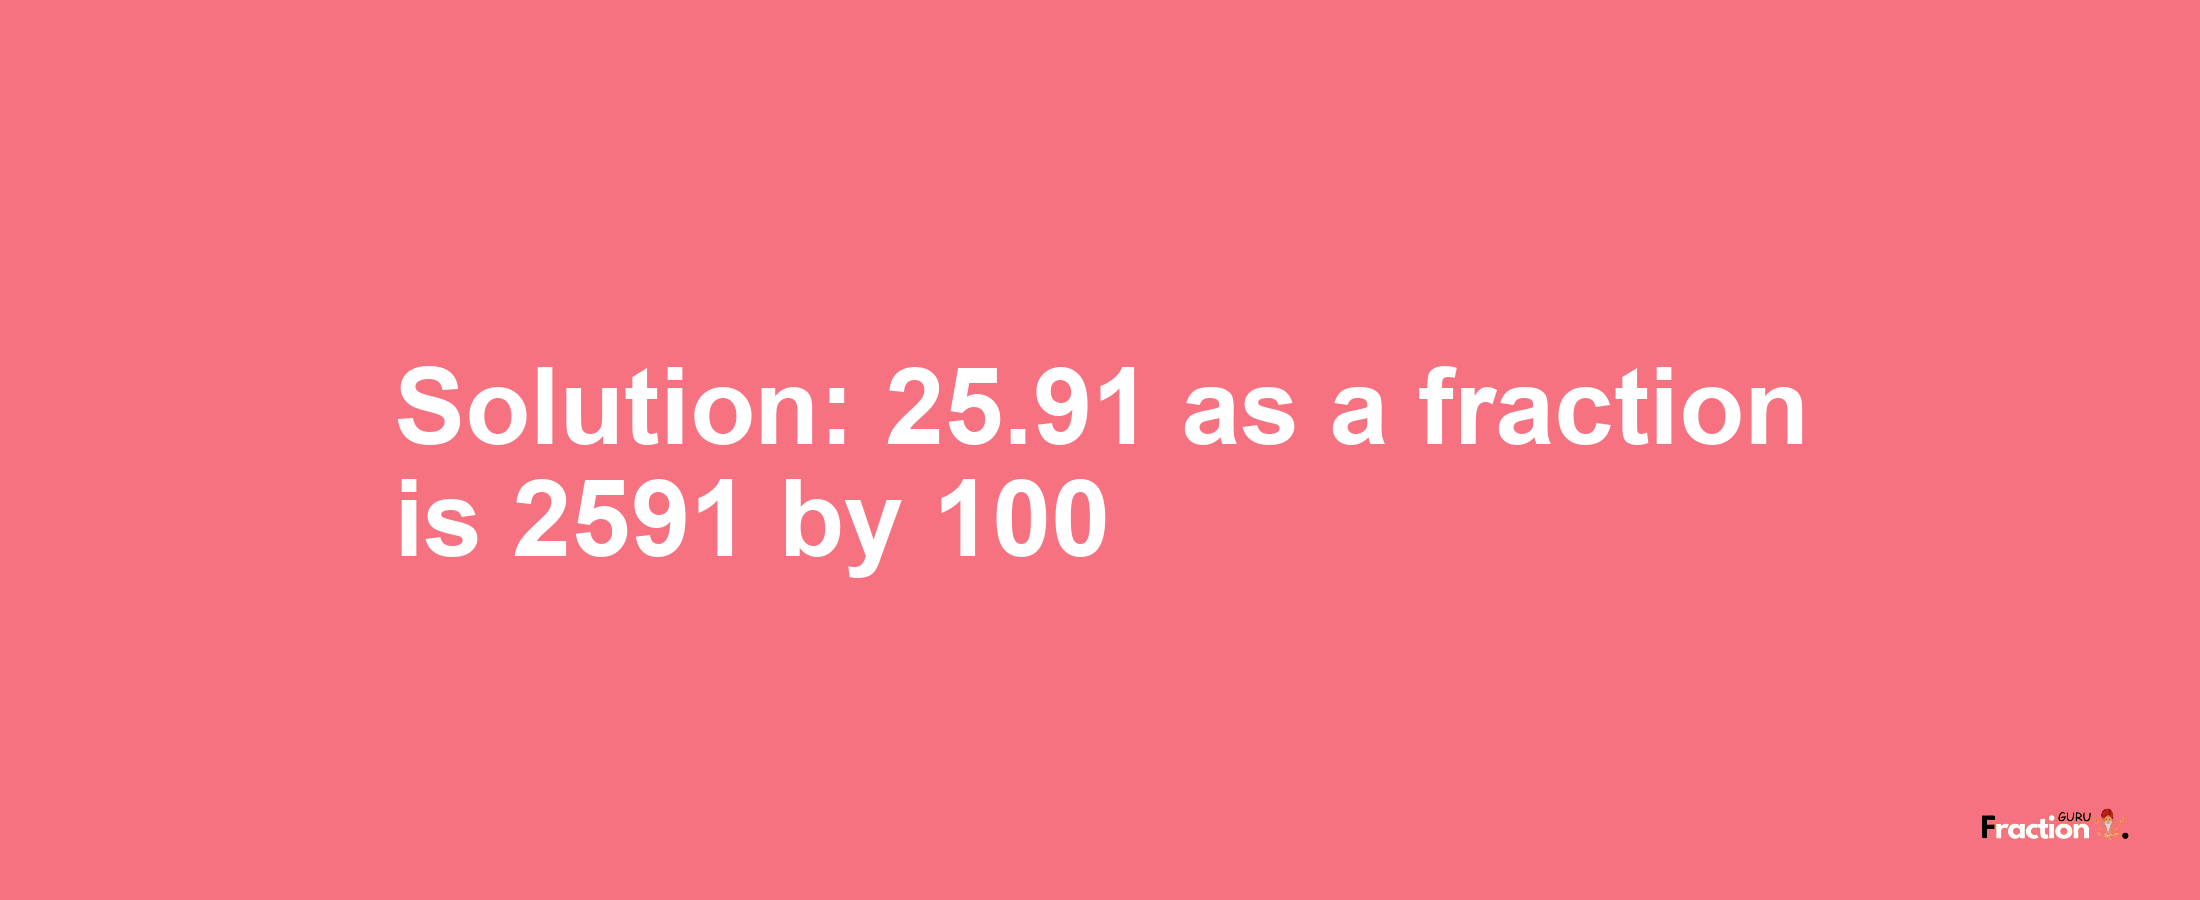 Solution:25.91 as a fraction is 2591/100